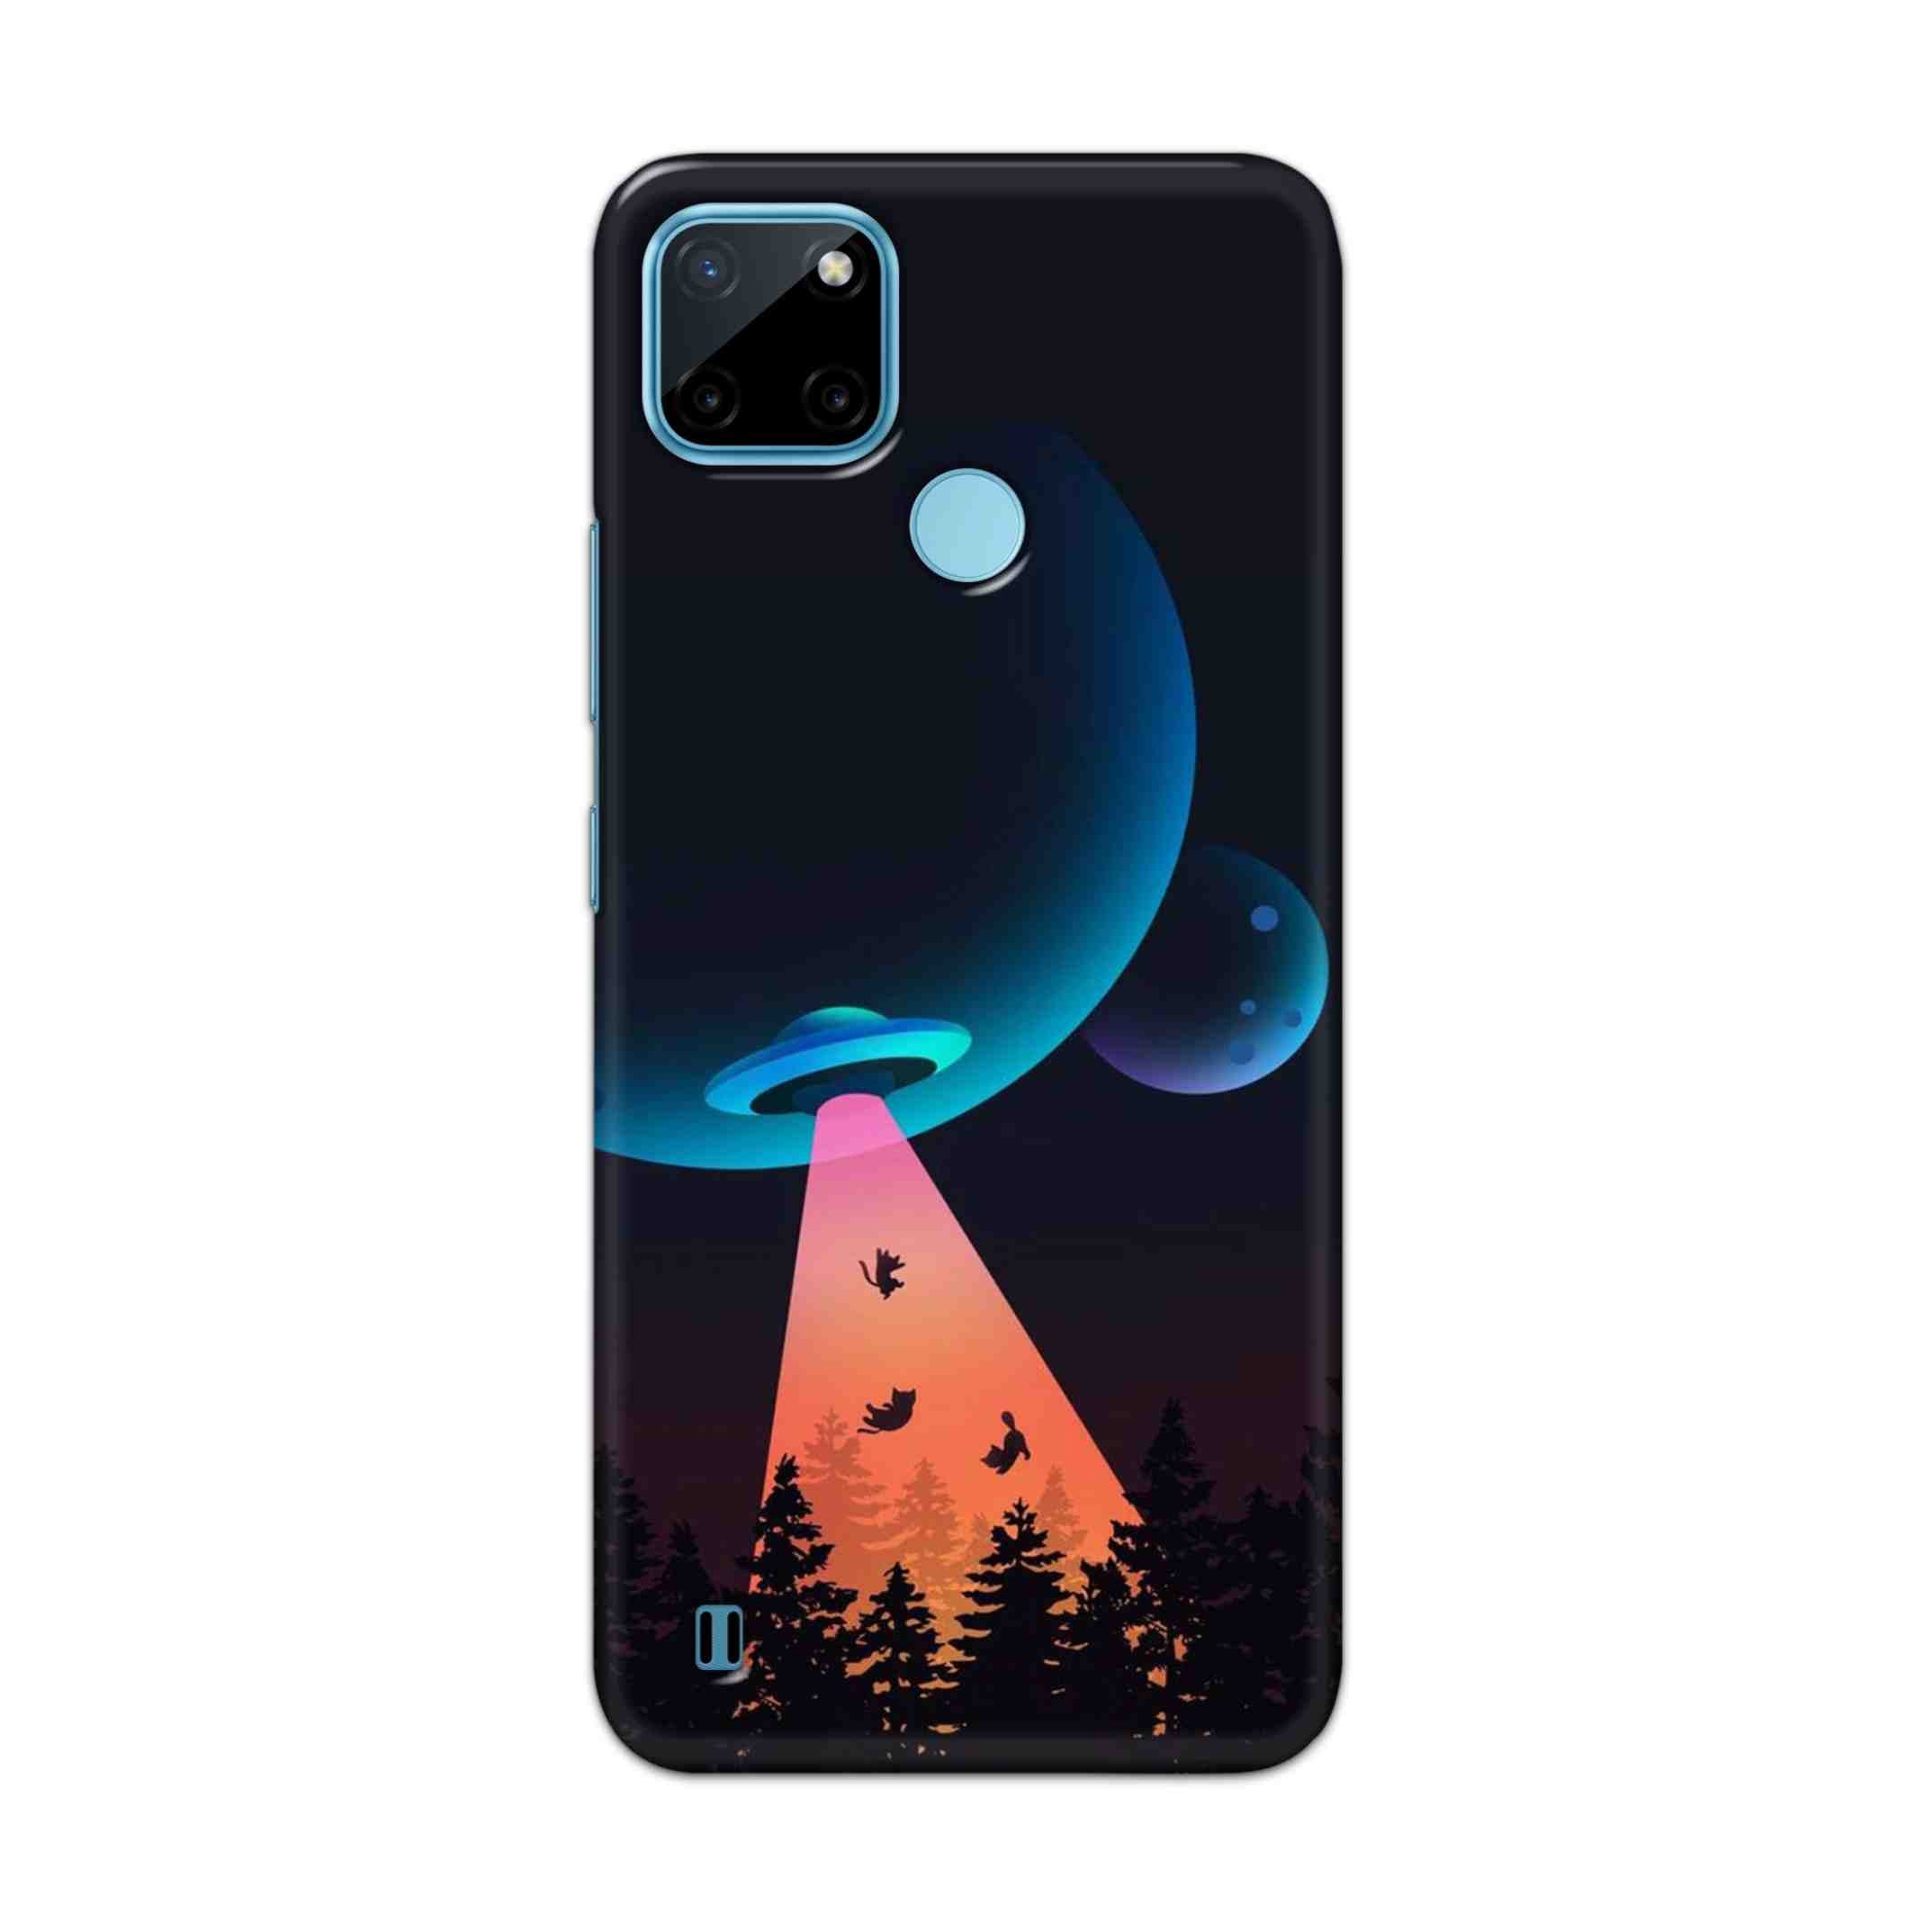 Buy Spaceship Hard Back Mobile Phone Case Cover For Realme C21Y Online